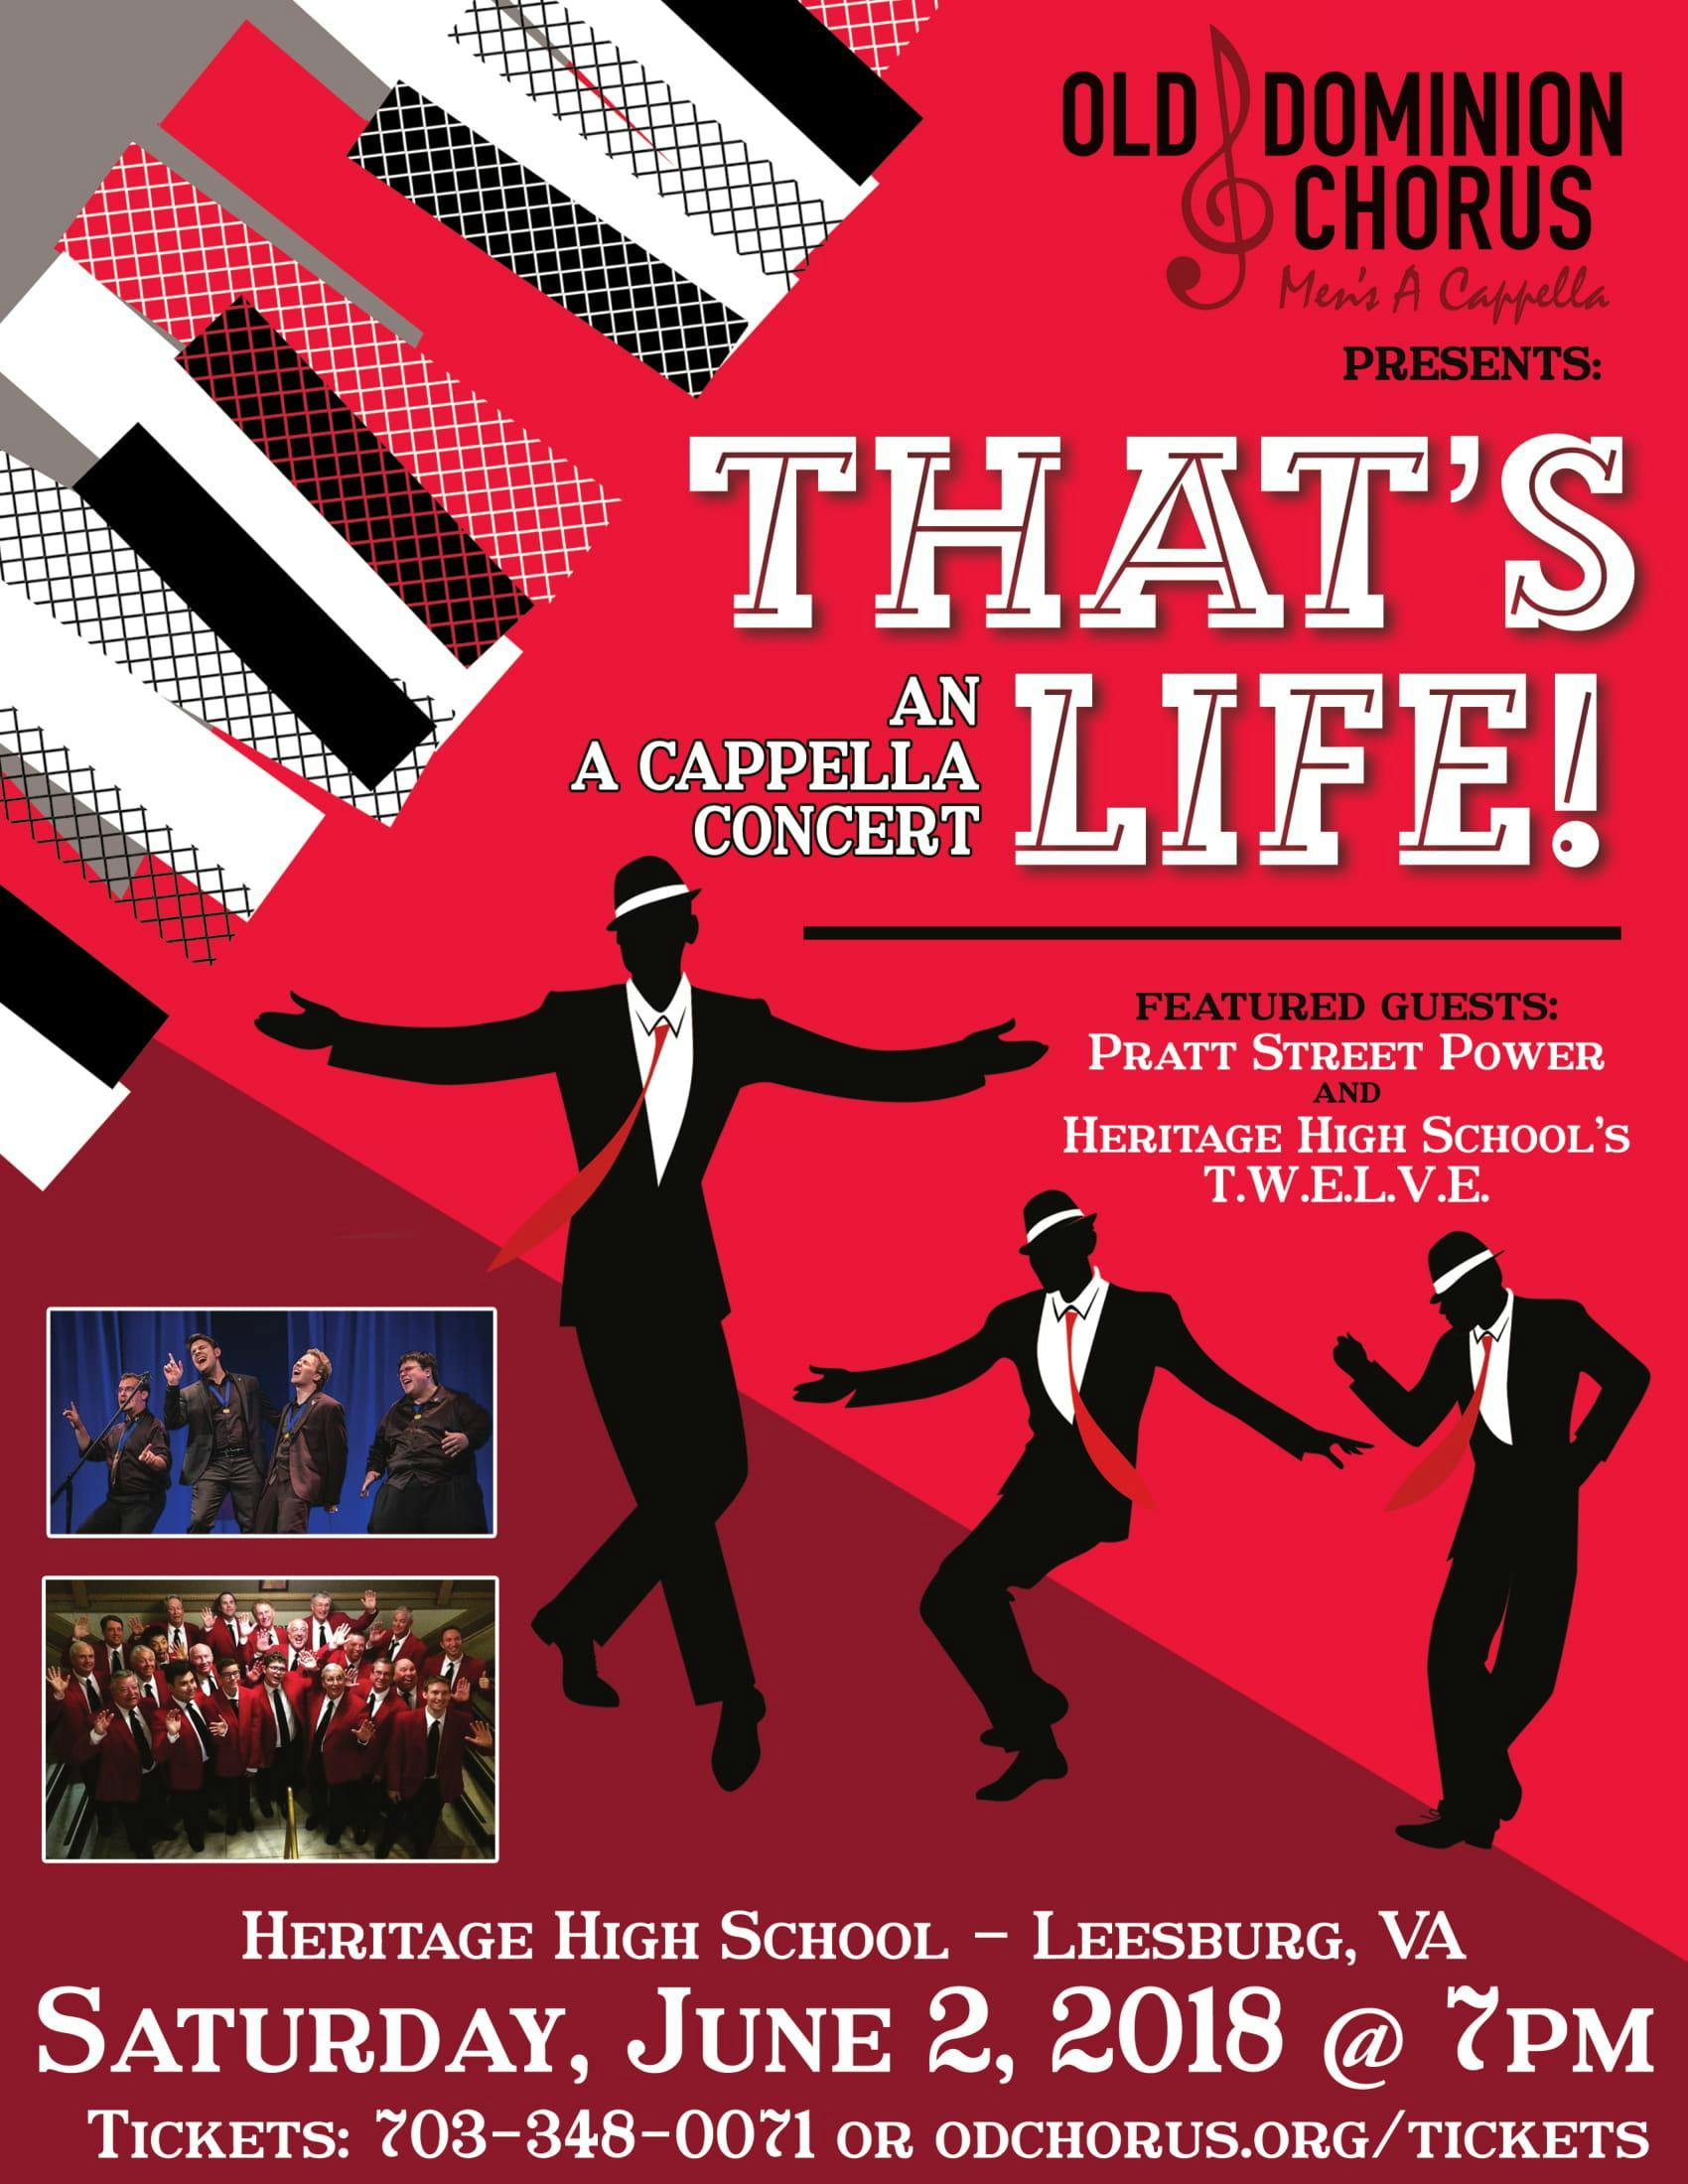 That's Life! Featuring Pratt Street Power! Presented by Old Dominion Chorus